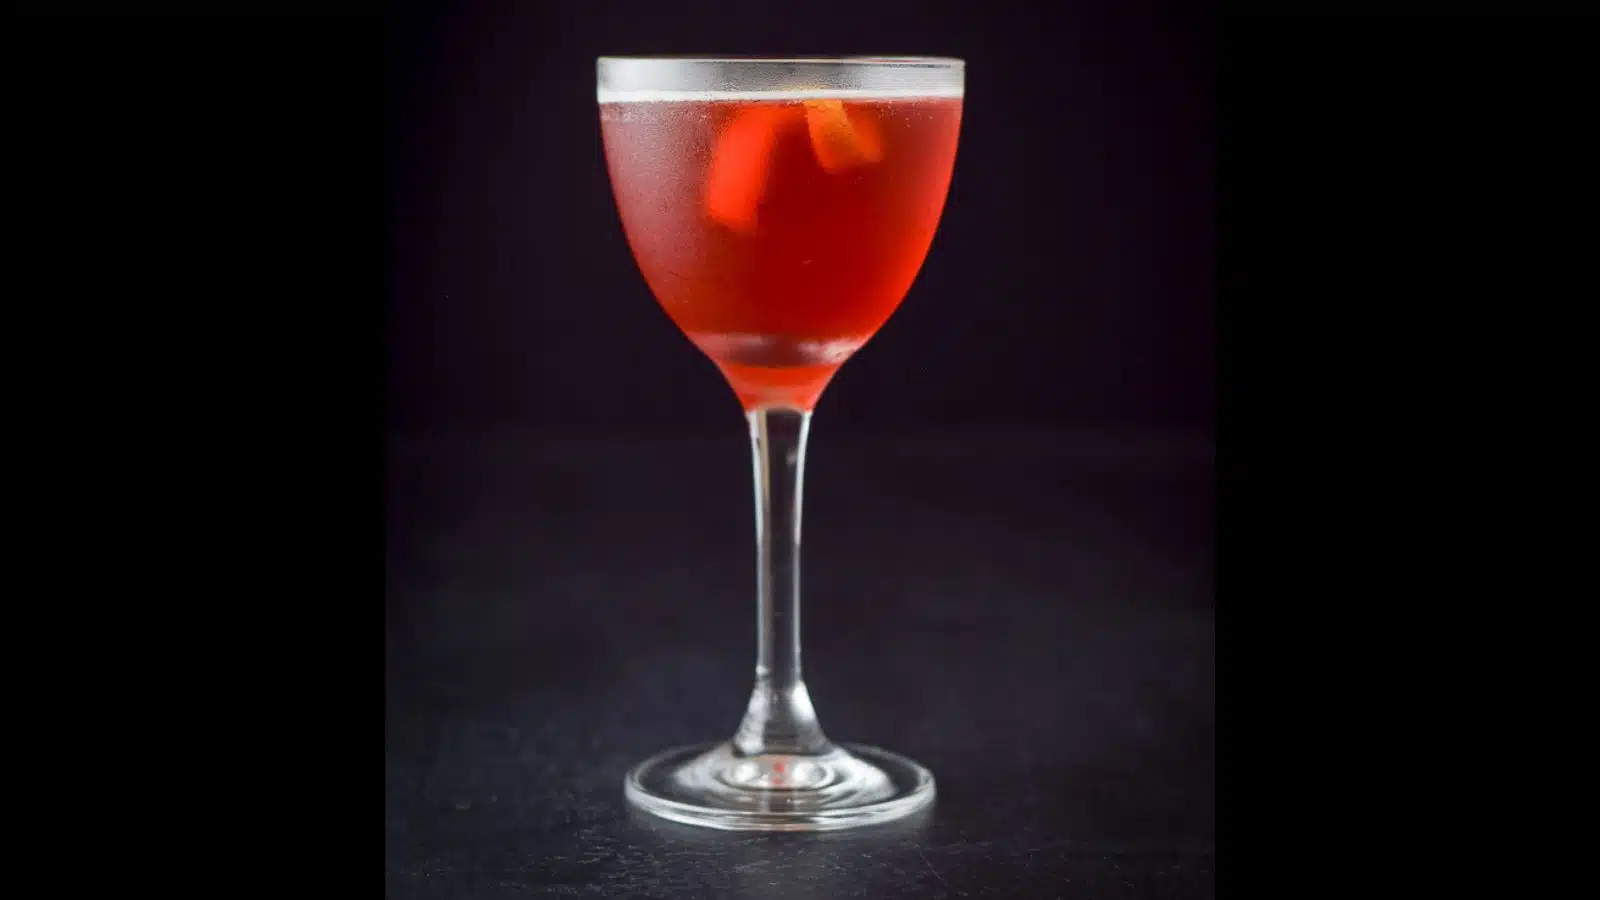 A nick and nora glass filled with the red cocktail with a lemon twist in it